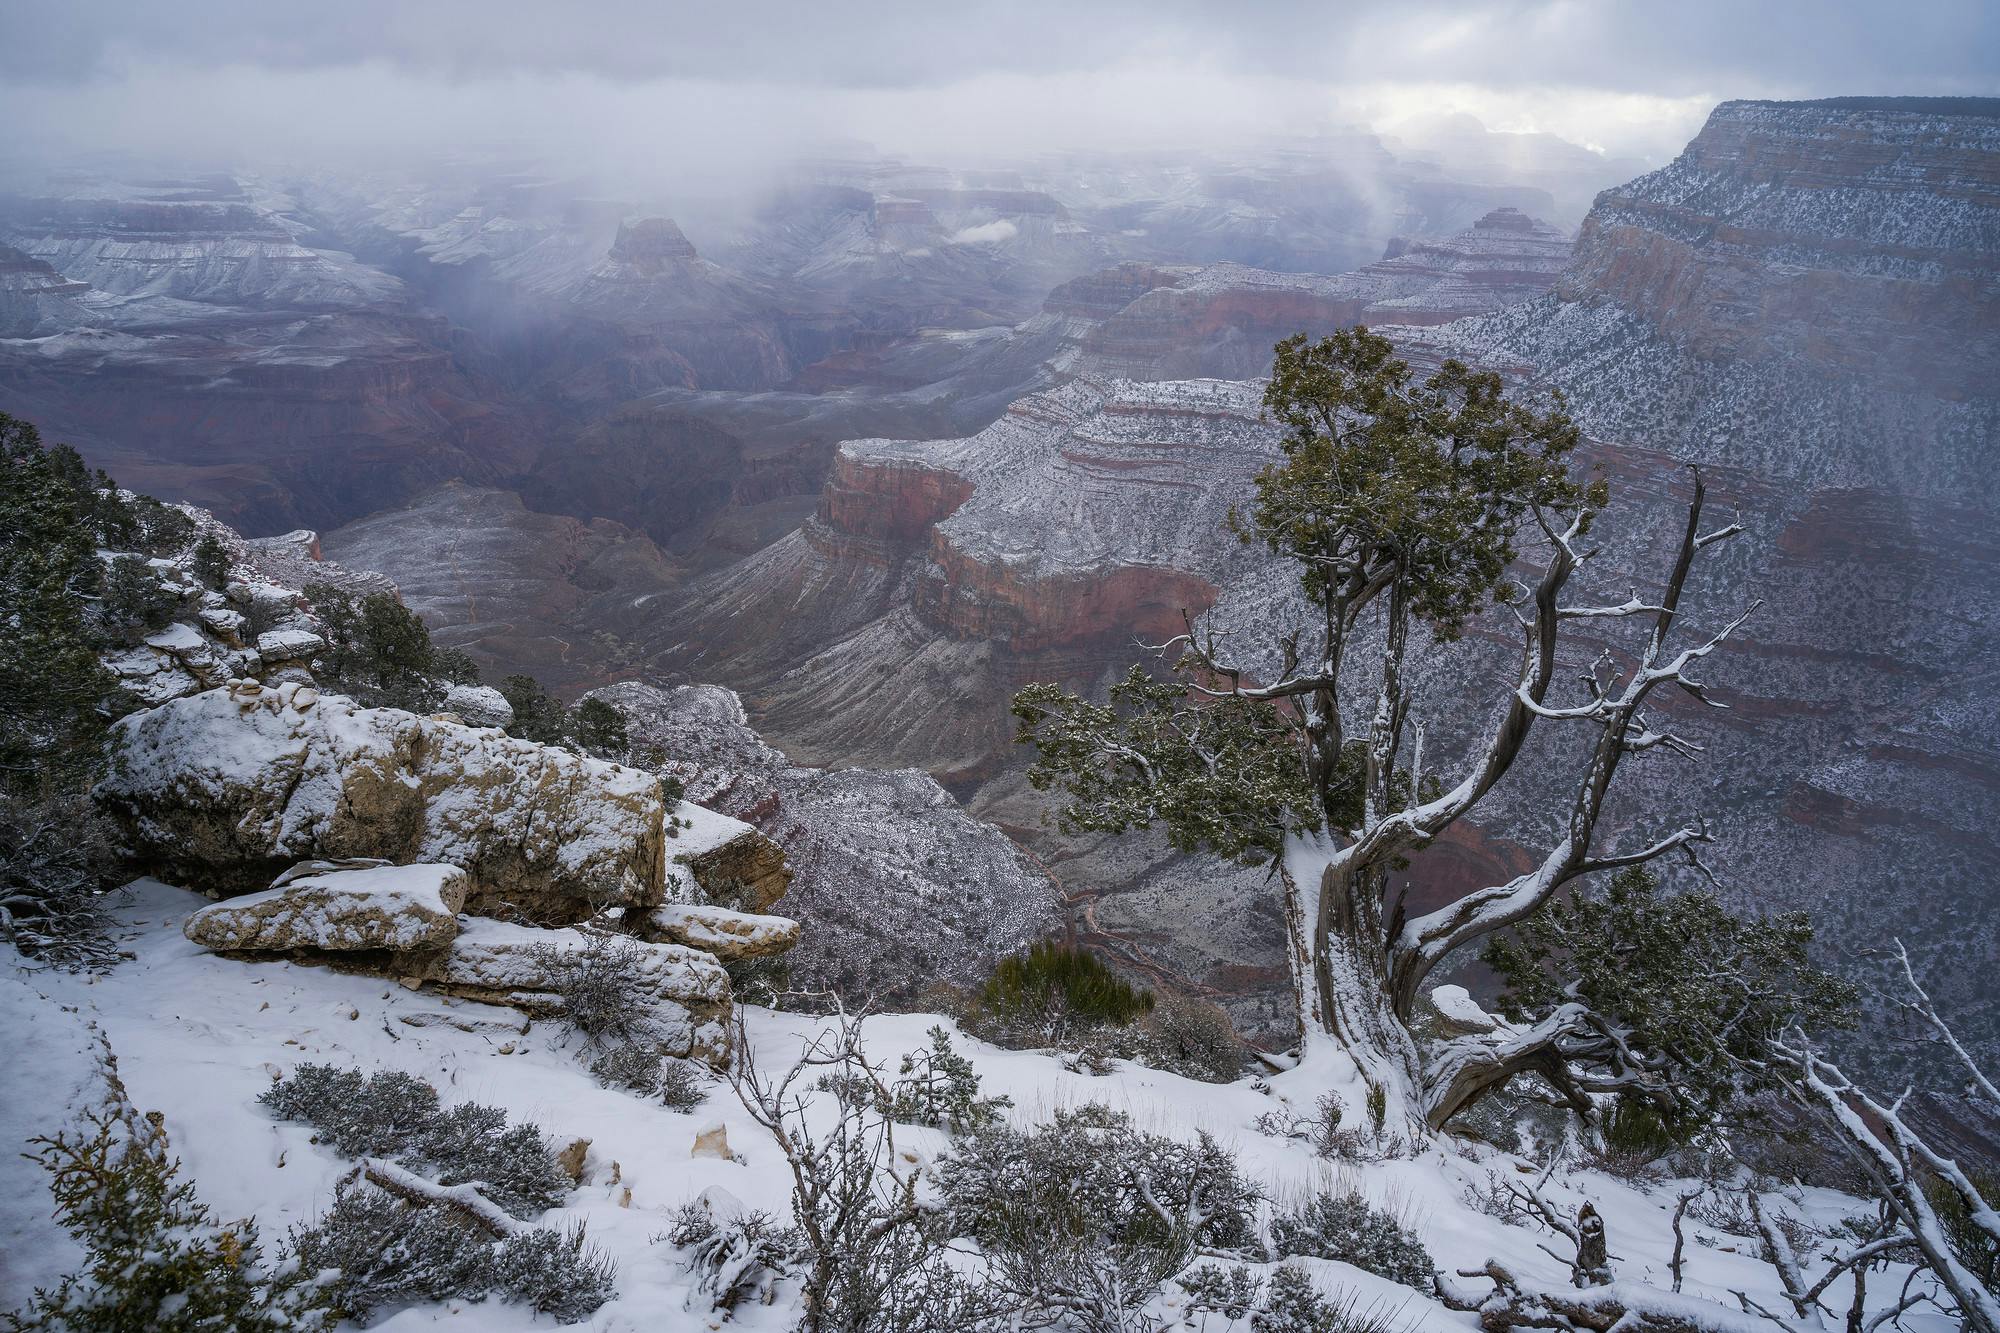 Clearing Winter Storm at the Grand Canyon